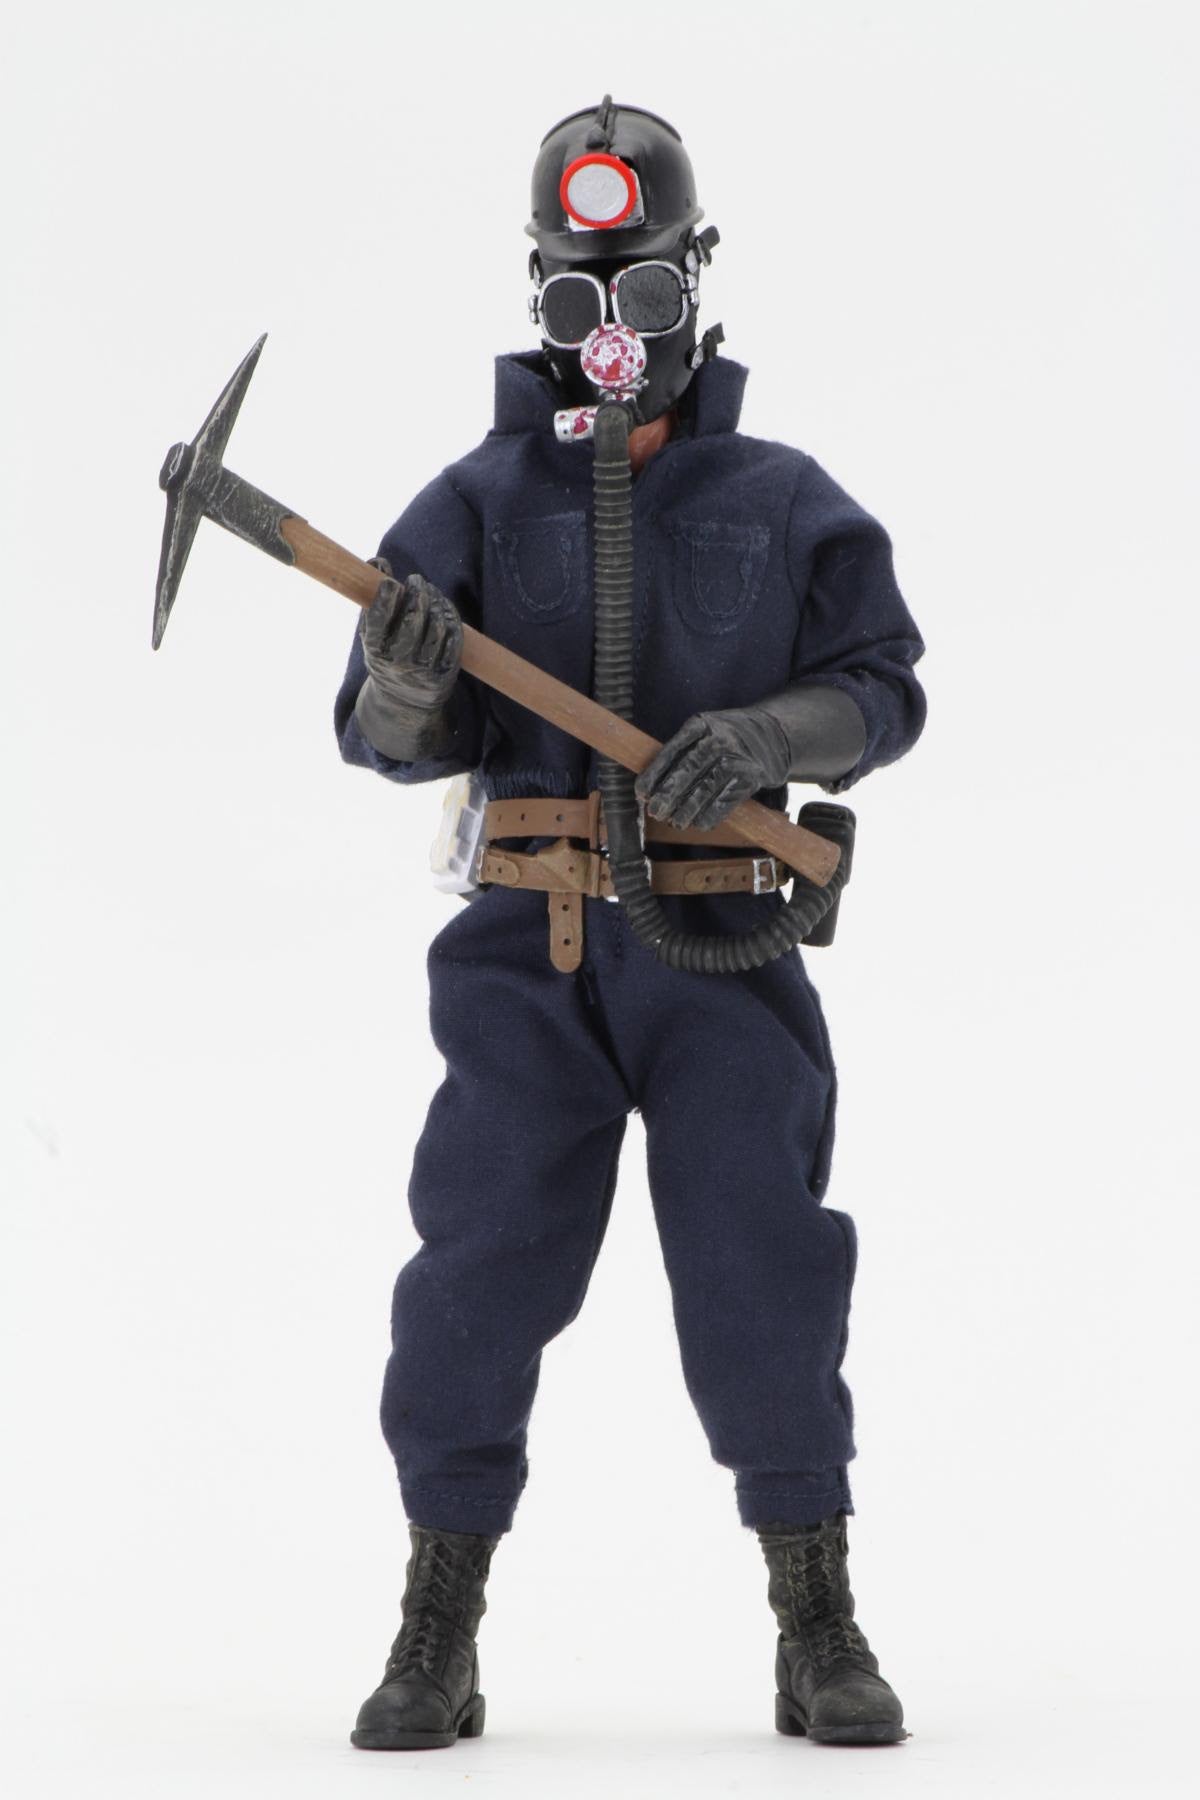 NECA - My Bloody Valentine - 8" Clothed Action Figure - The Miner